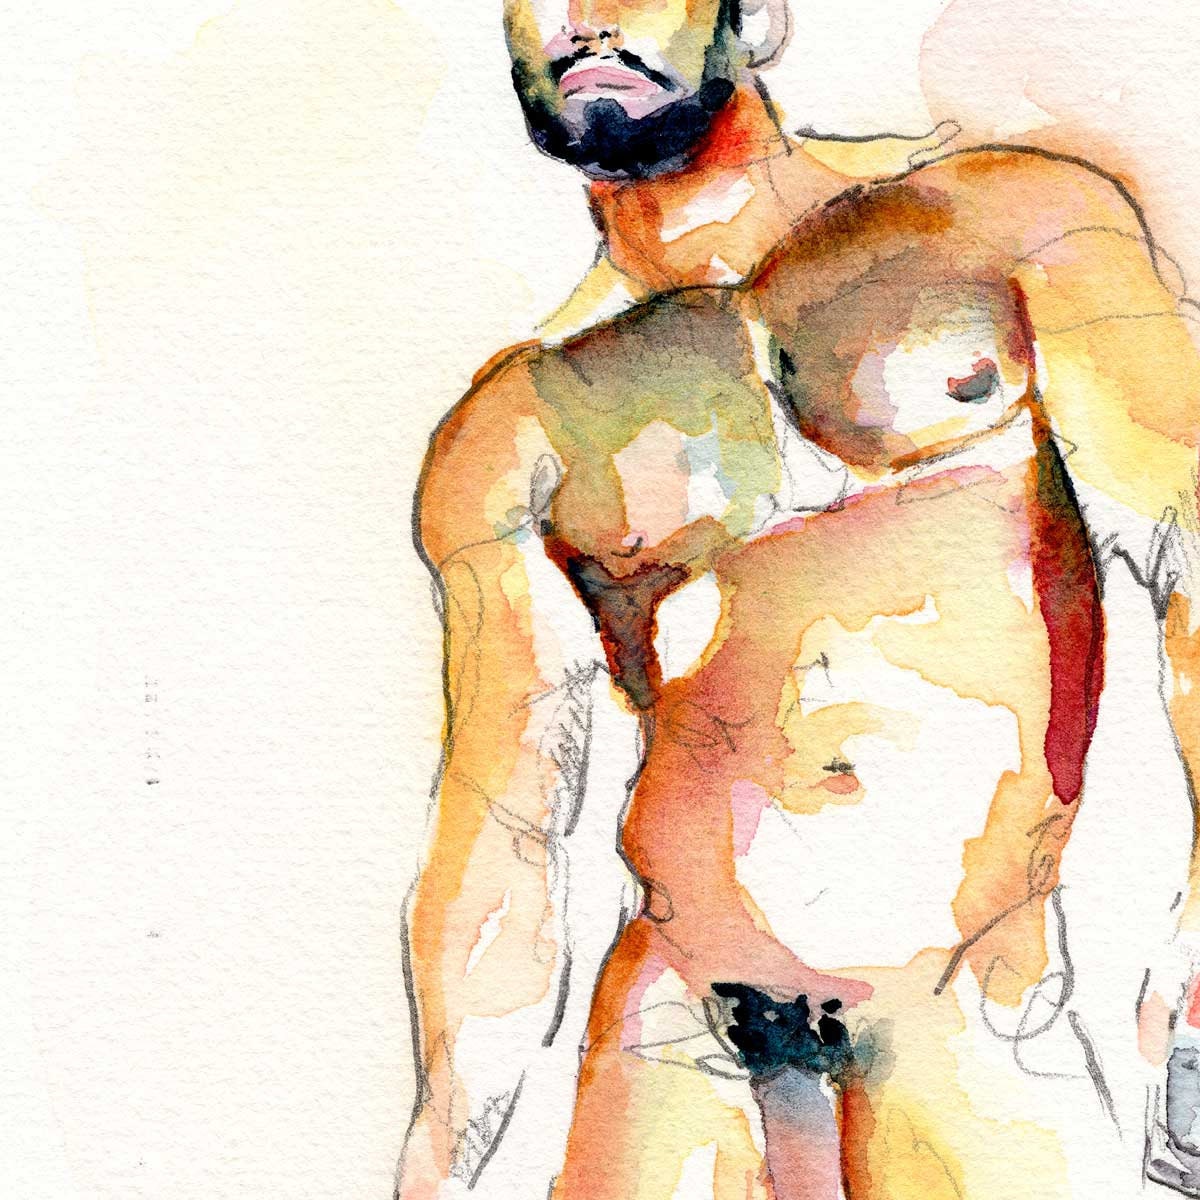 Hairy Chested Man Holding a Glass Full Nude - Original Watercolor Painting